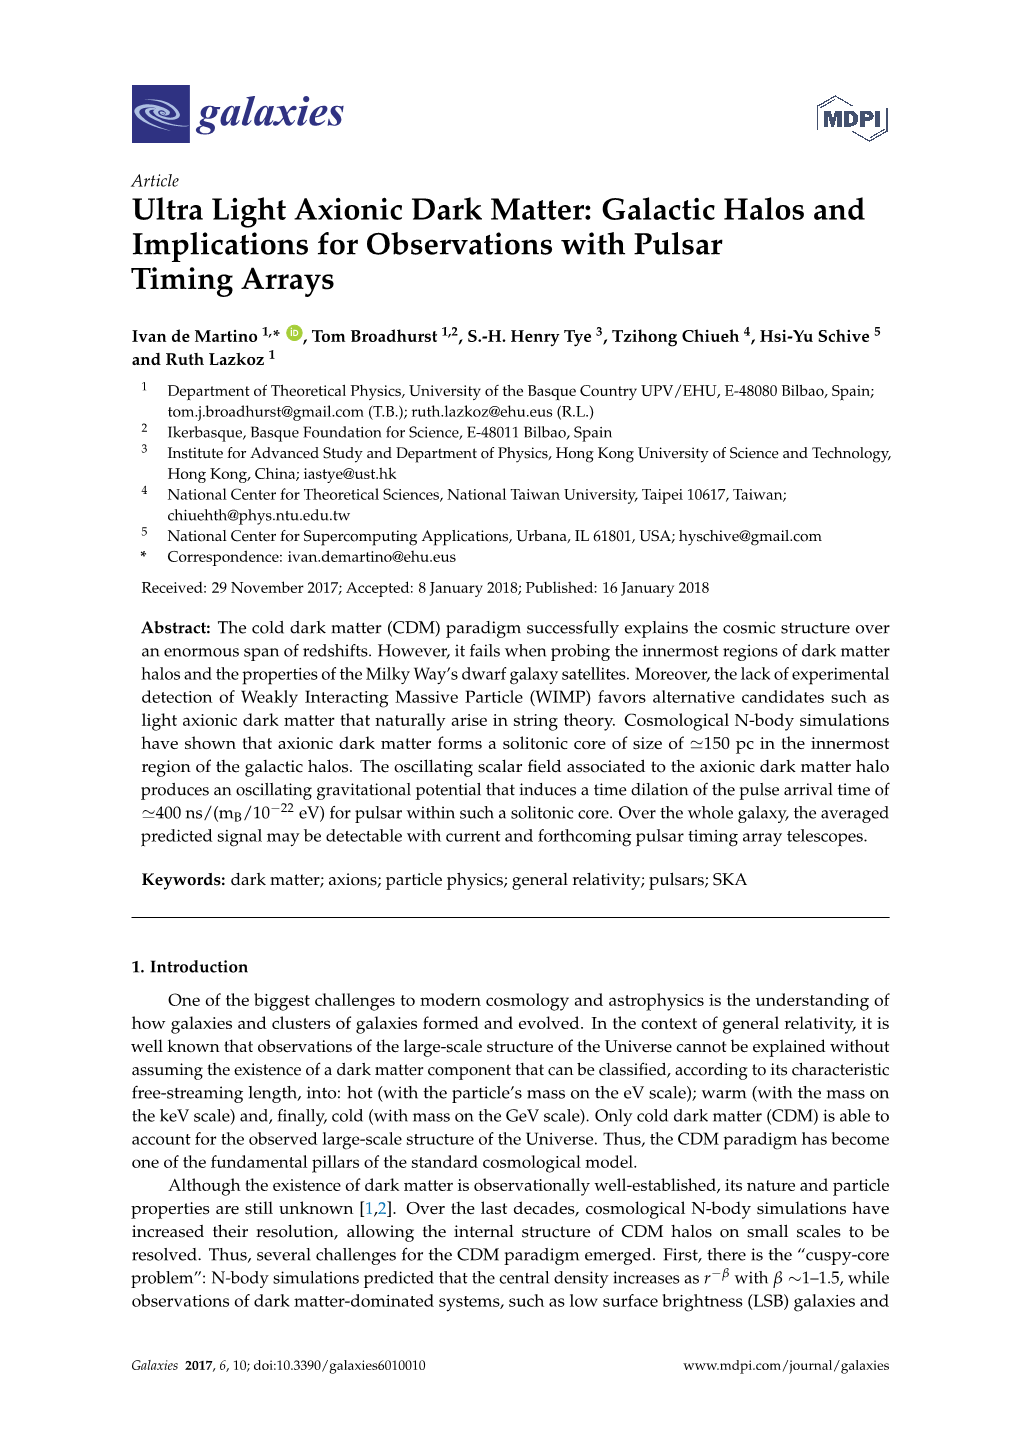 Ultra Light Axionic Dark Matter: Galactic Halos and Implications for Observations with Pulsar Timing Arrays